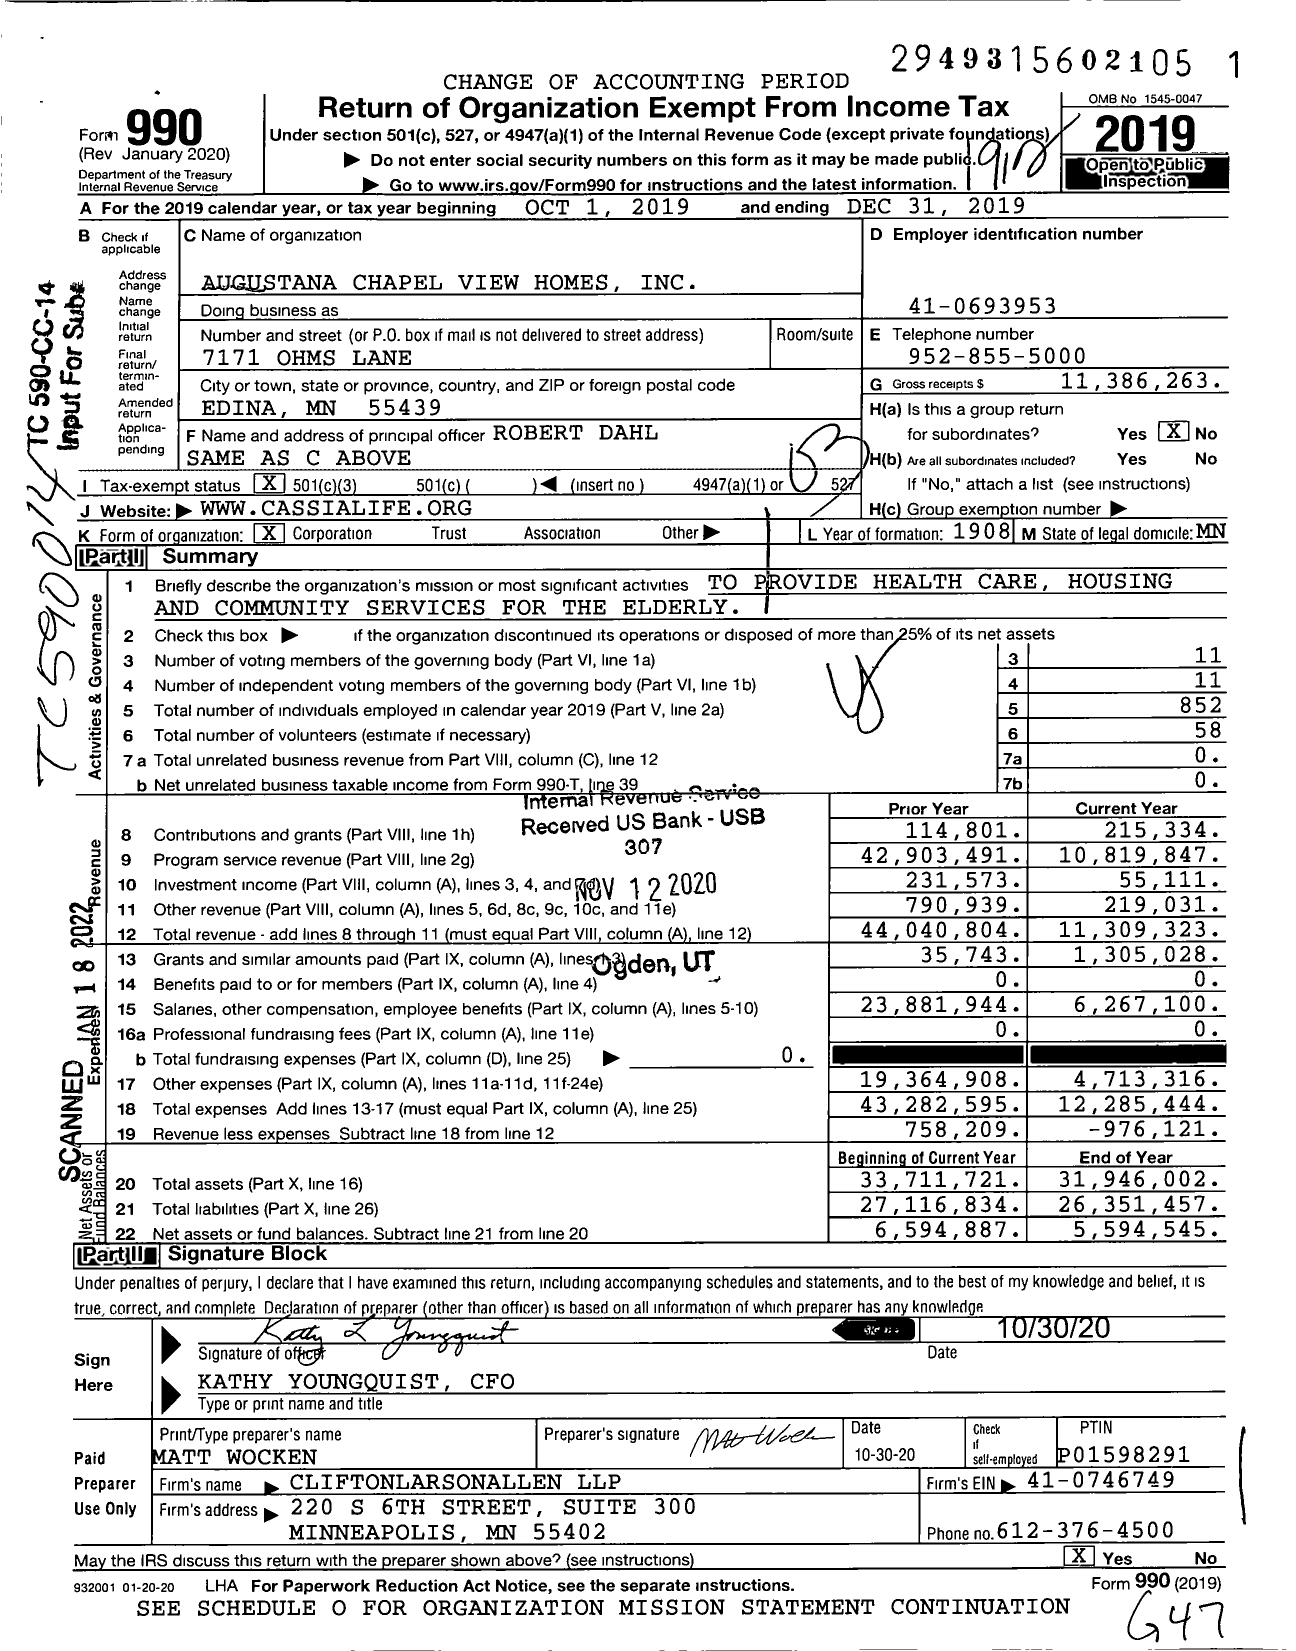 Image of first page of 2019 Form 990 for Augustana Chapel View Homes